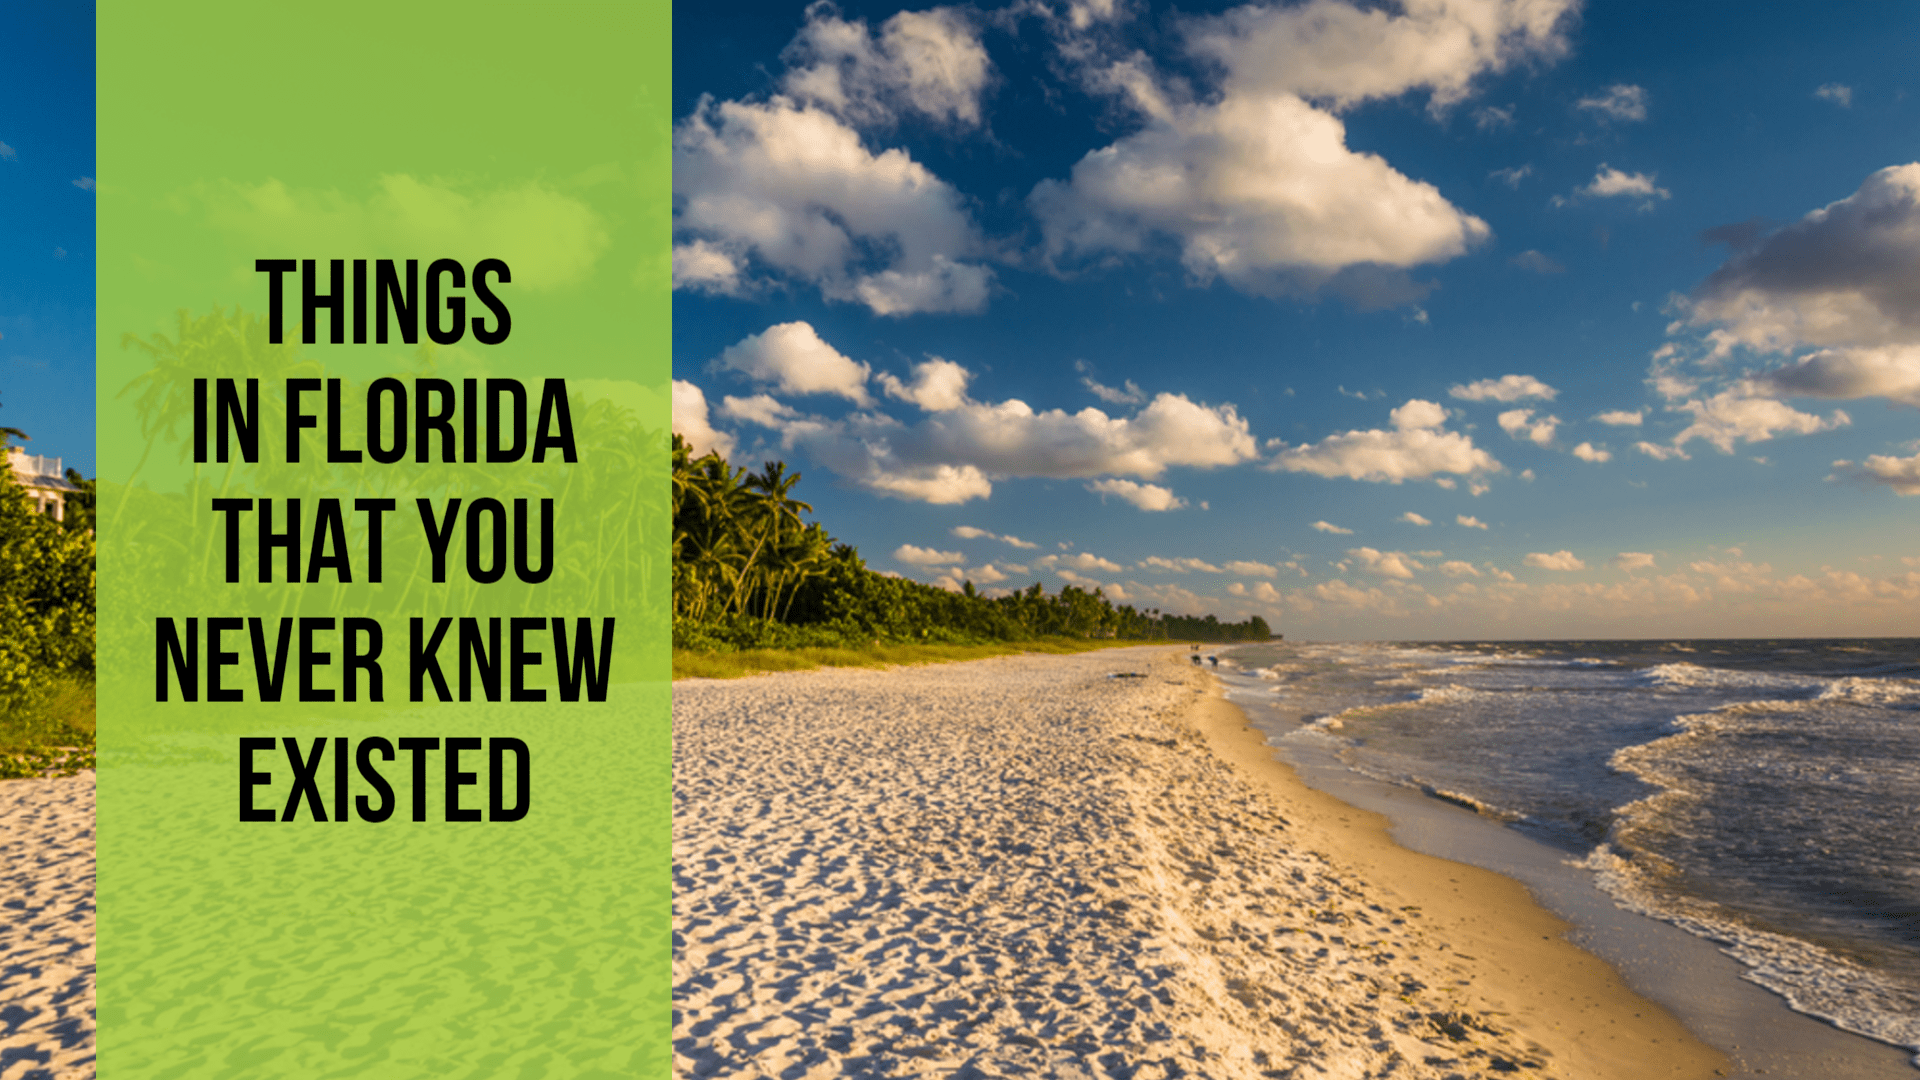 Things in Florida That You Never Knew Existed